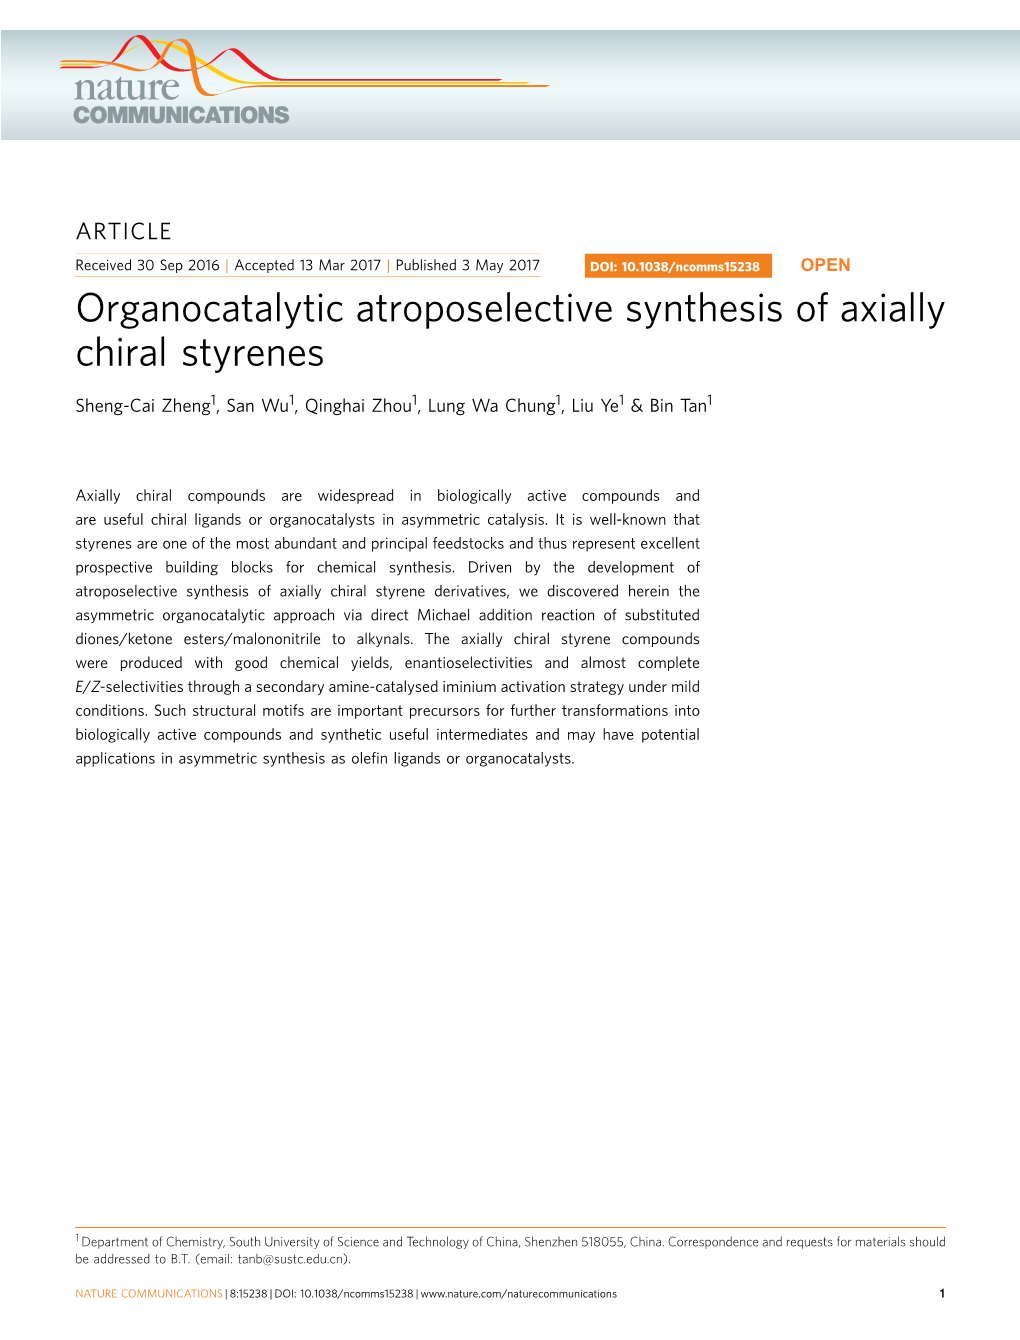 Organocatalytic Atroposelective Synthesis of Axially Chiral Styrenes